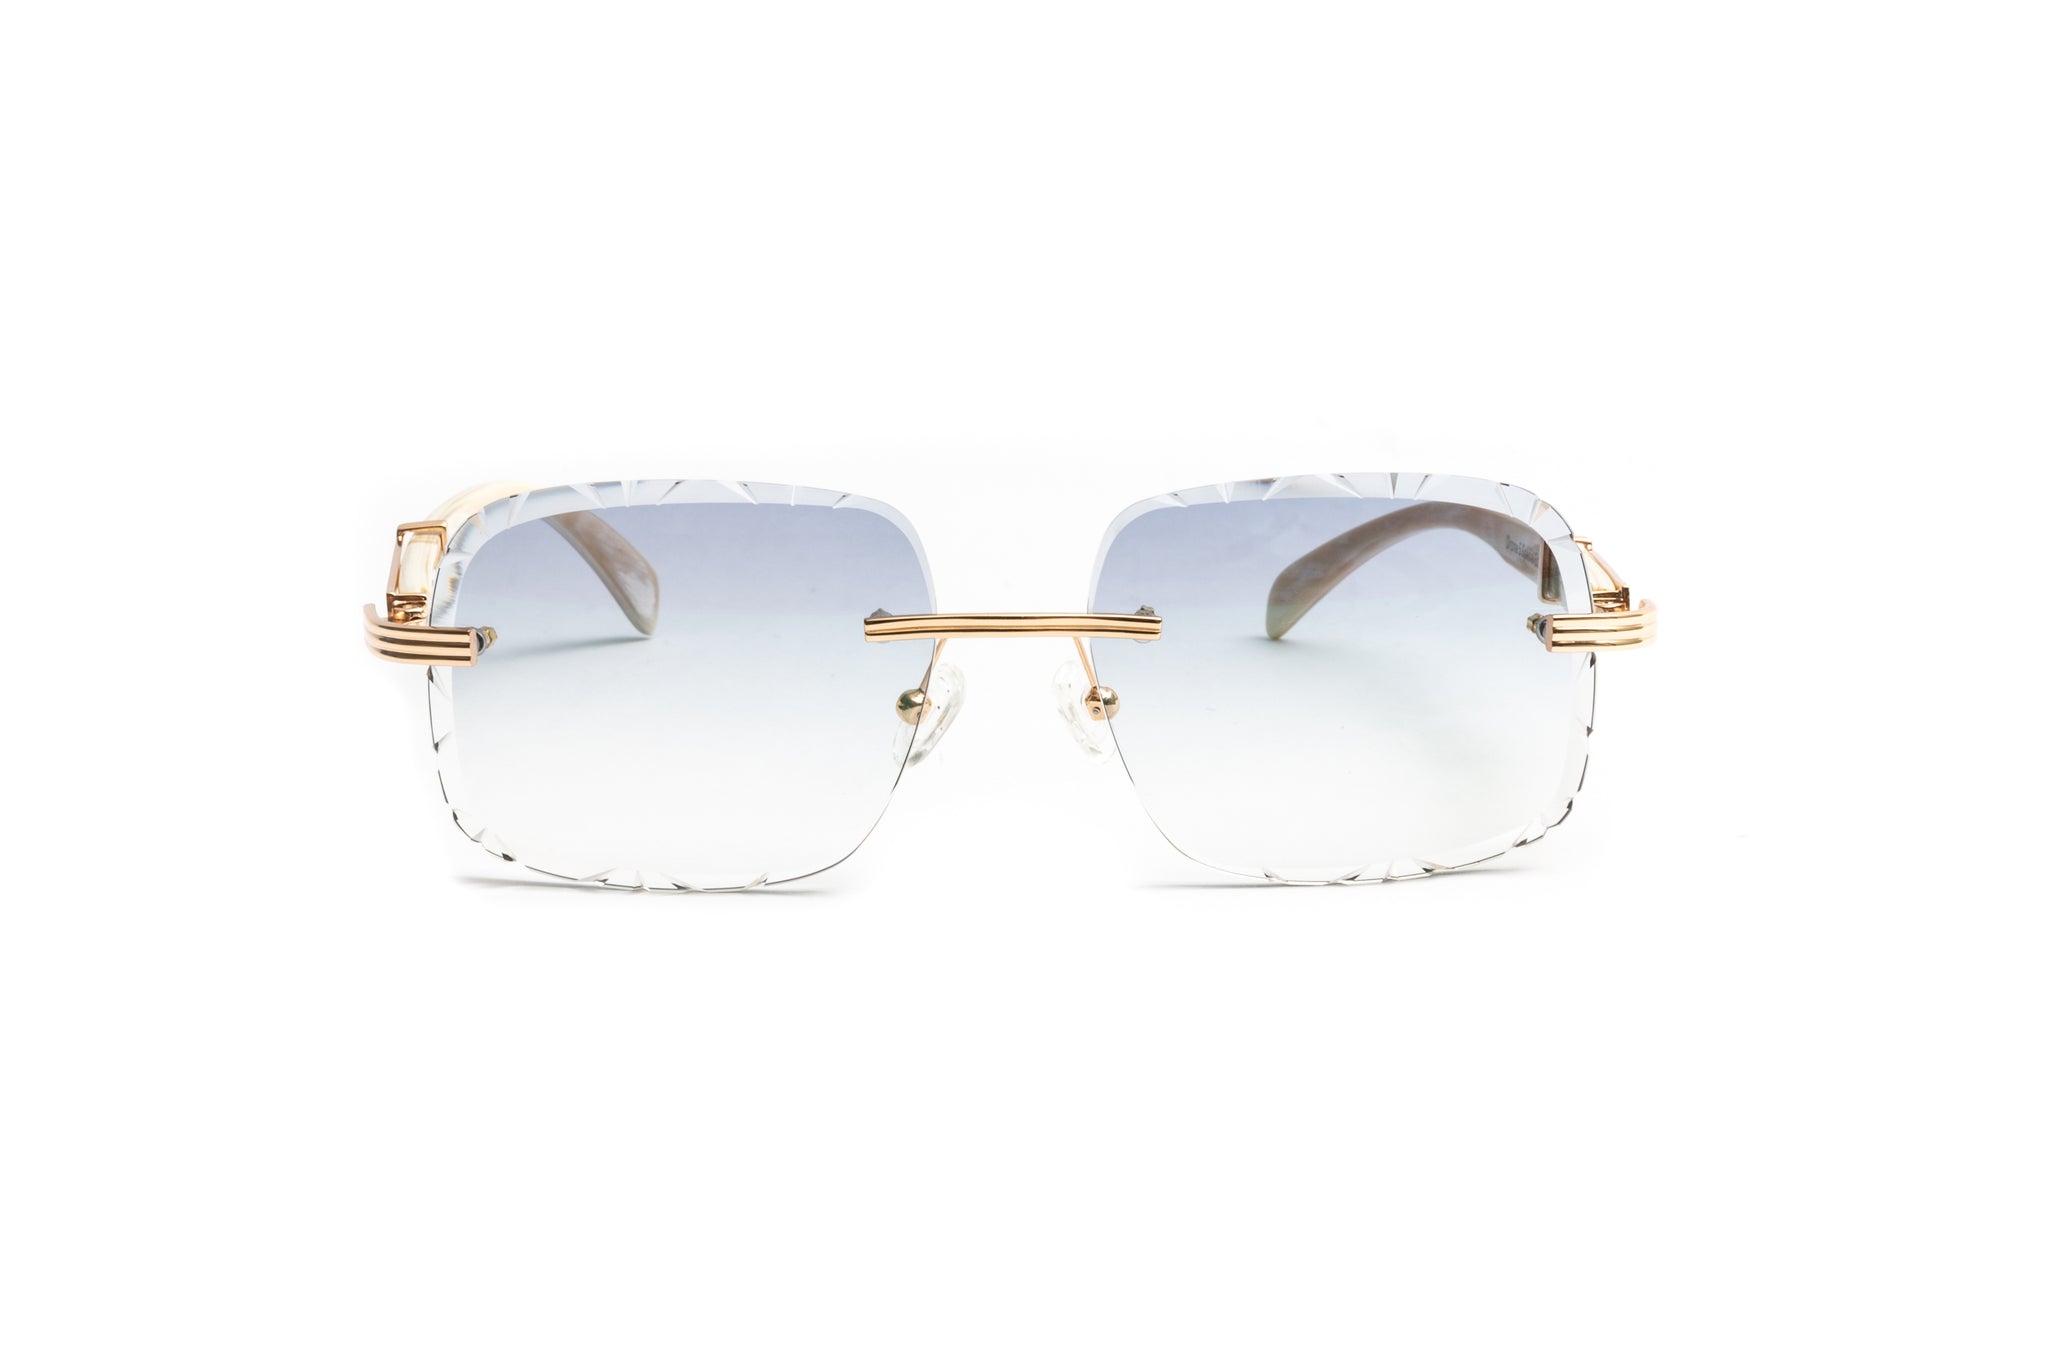 18kt gold plated and white buffalo horn Cartier style men's sunglasses with gradient grey diamond cut square lenses by Vintage Wood Collection